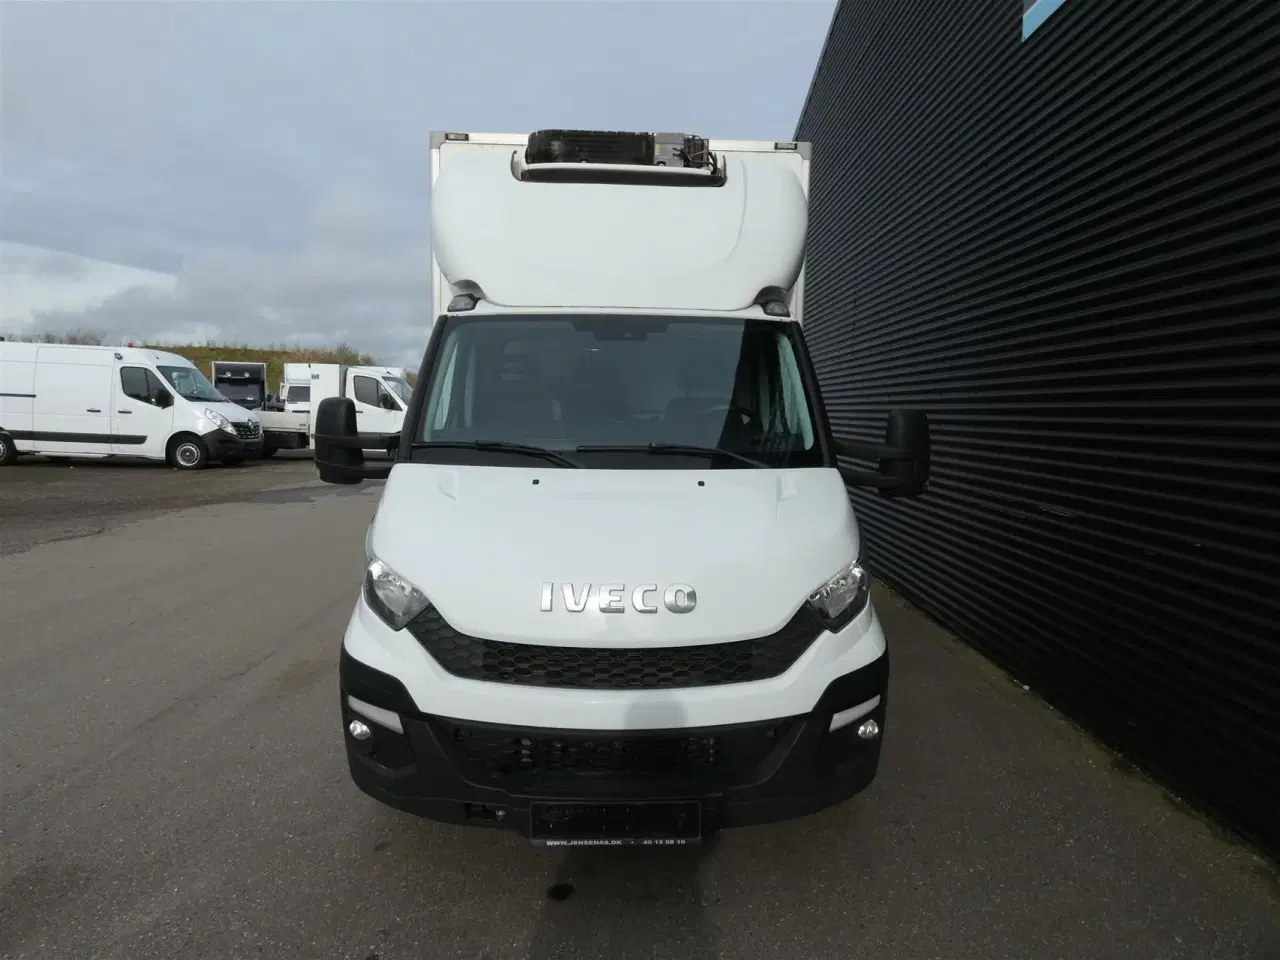 Billede 3 - Iveco Daily 35S17 3750mm 3,0 D 170HK Ladv./Chas. 6g